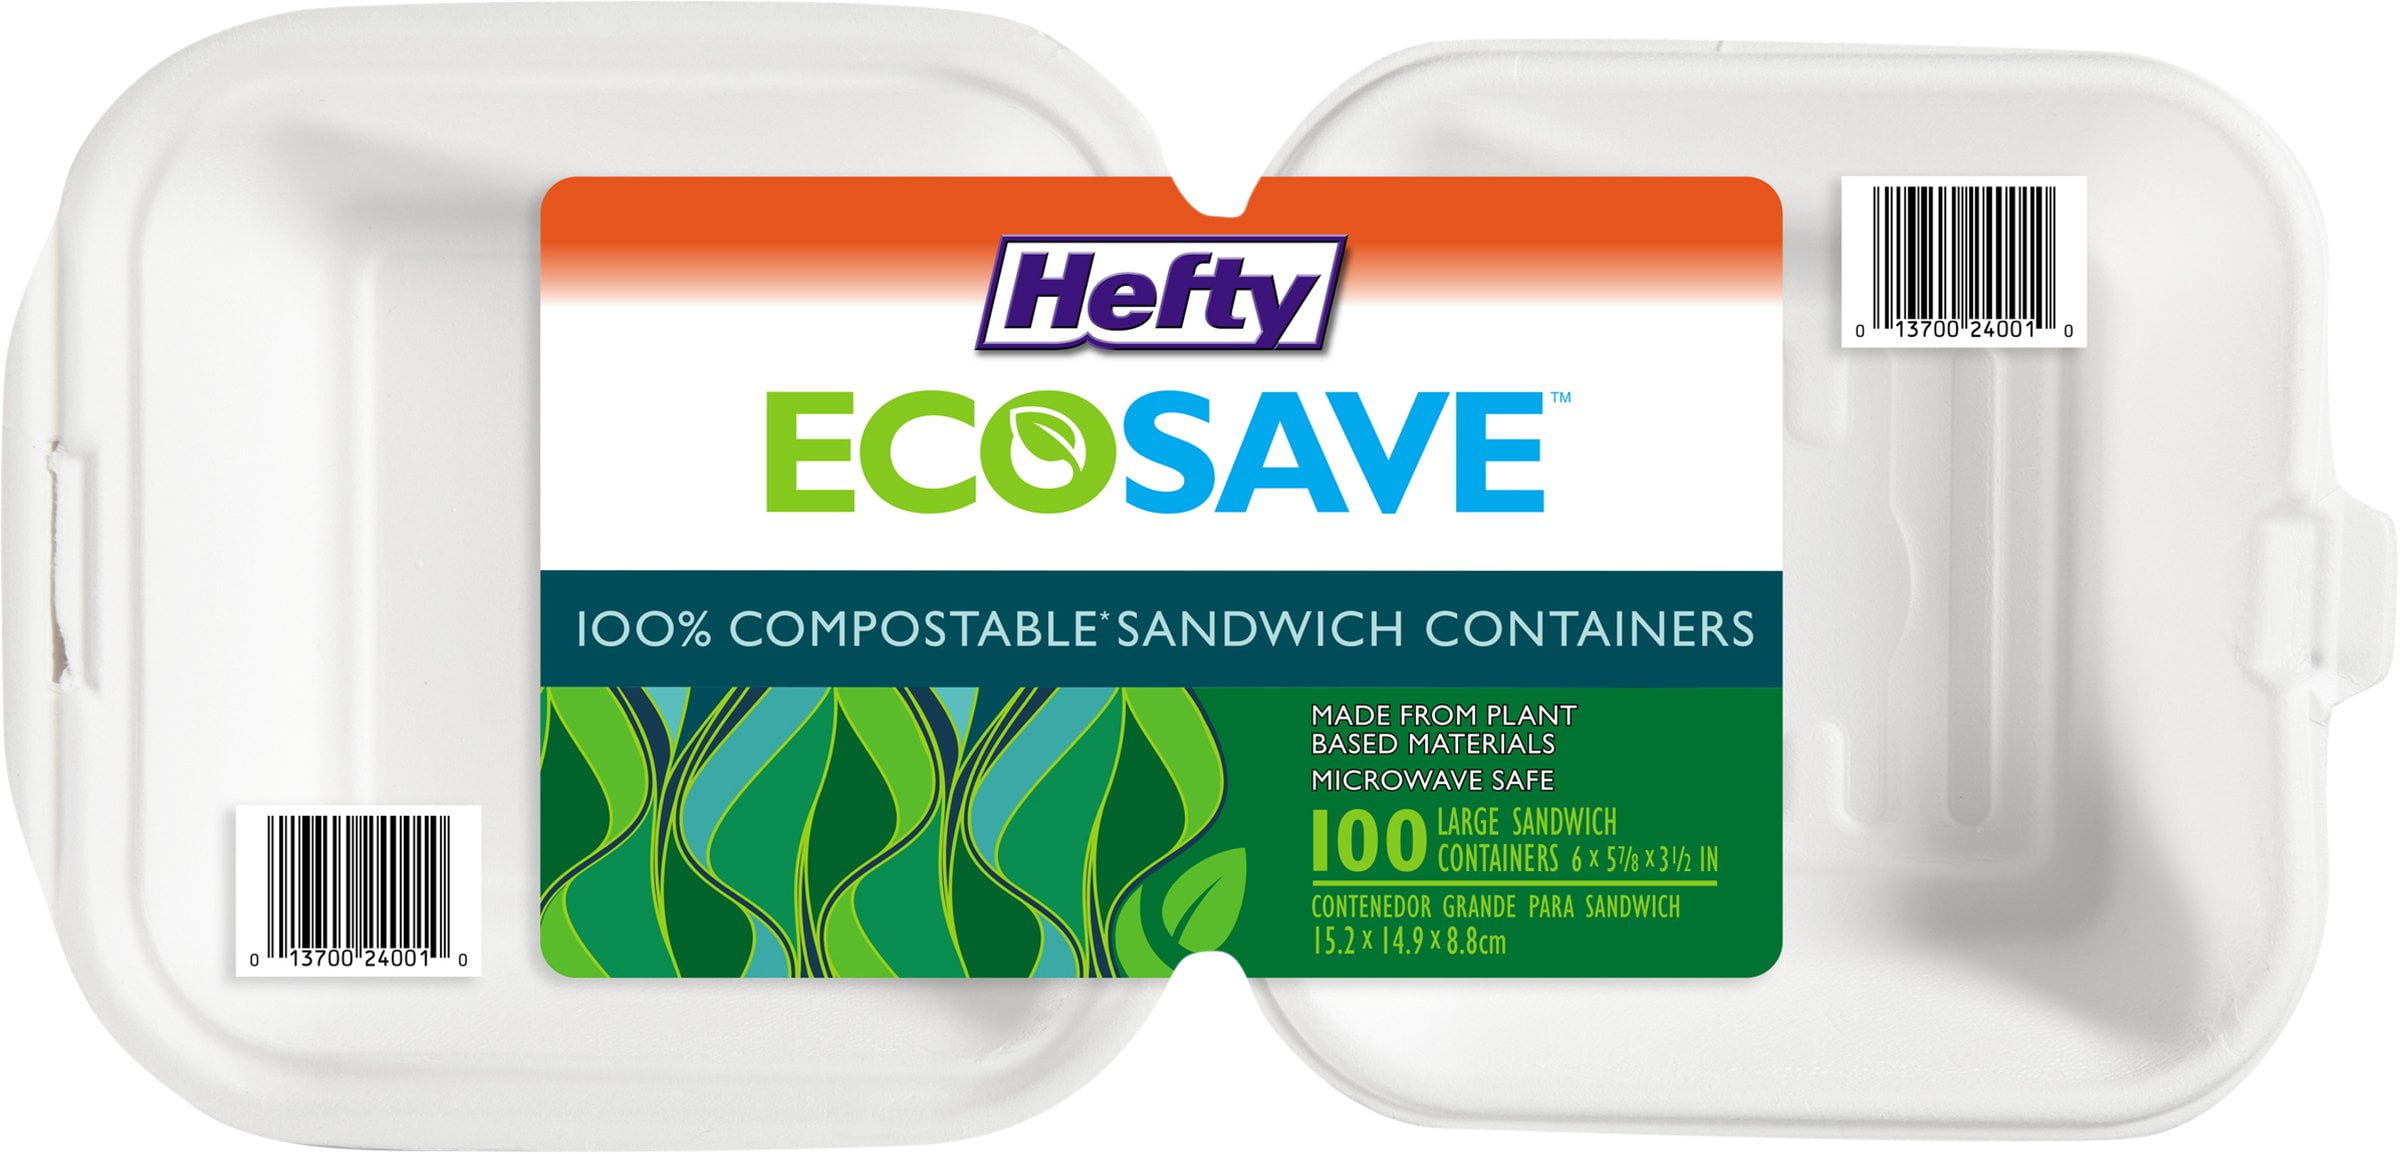 Eco-Systems Clear Polypropylene Microwave Large Hinged Sandwich Container,  6 x 6 x 3 inch -- 300 per case